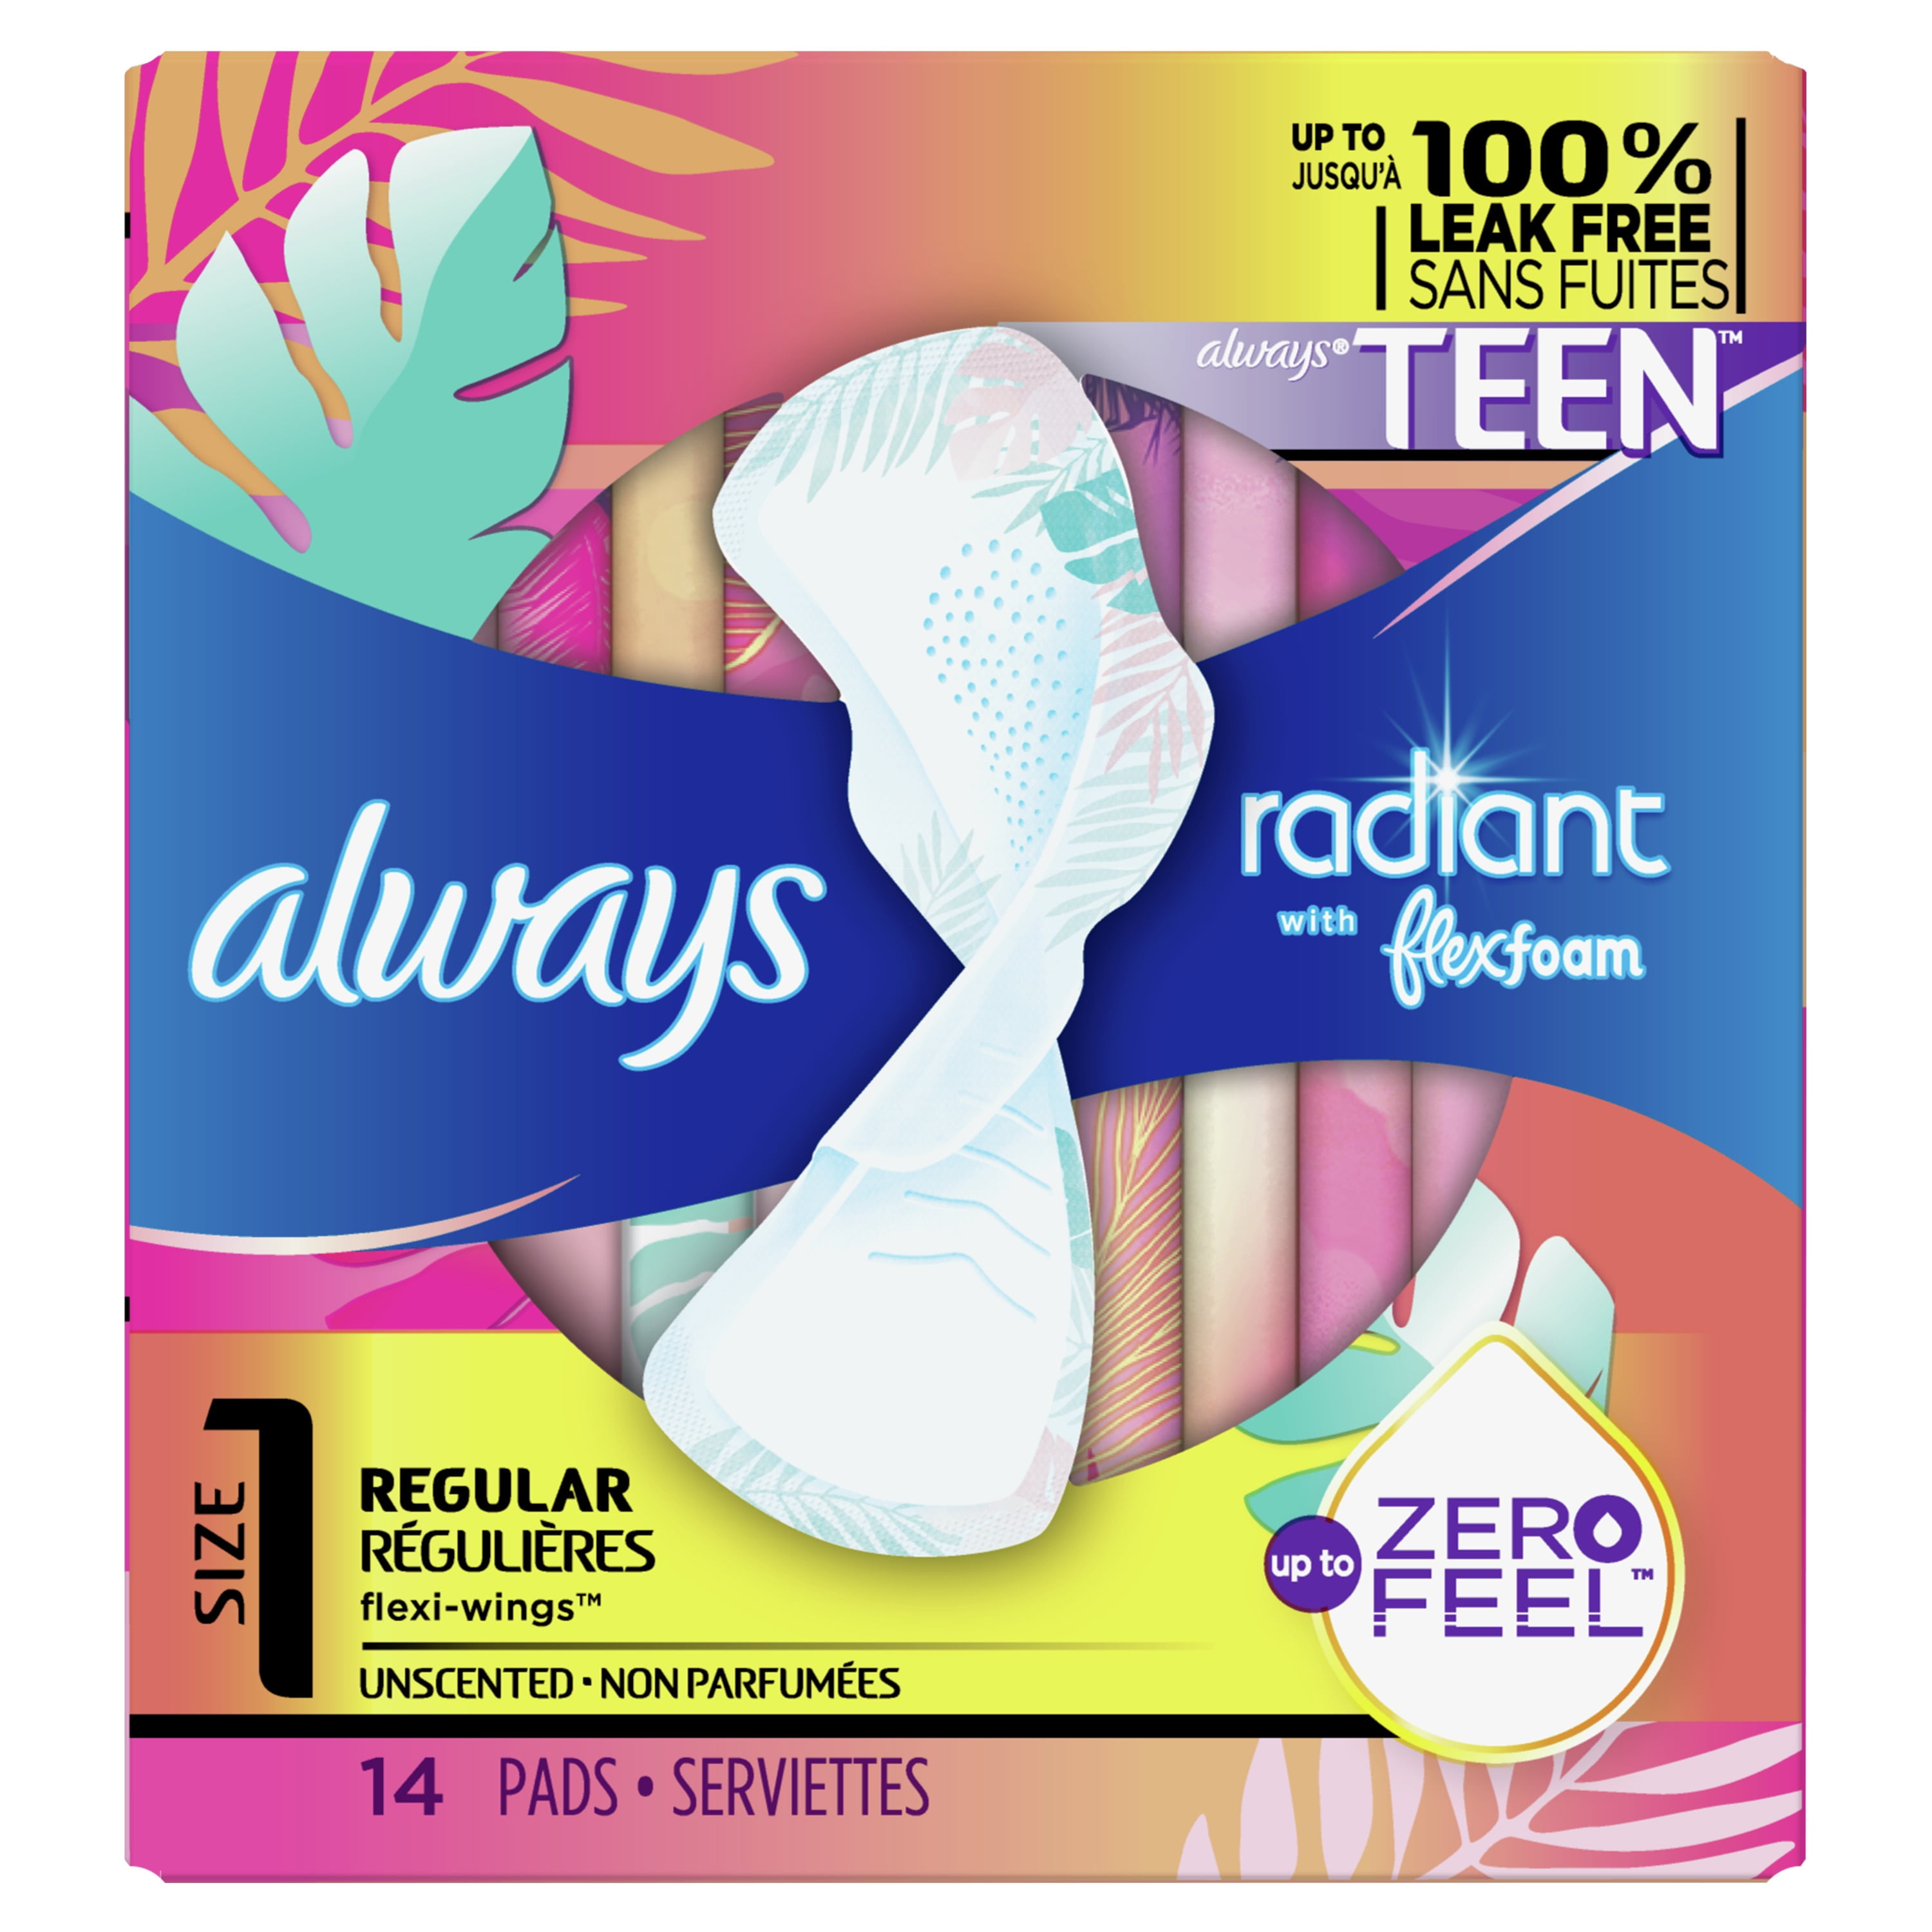 Always Radiant Teen Feminine Pads with FlexFoam, Size 1, Regular, with  wings, Unscented, 14 CT